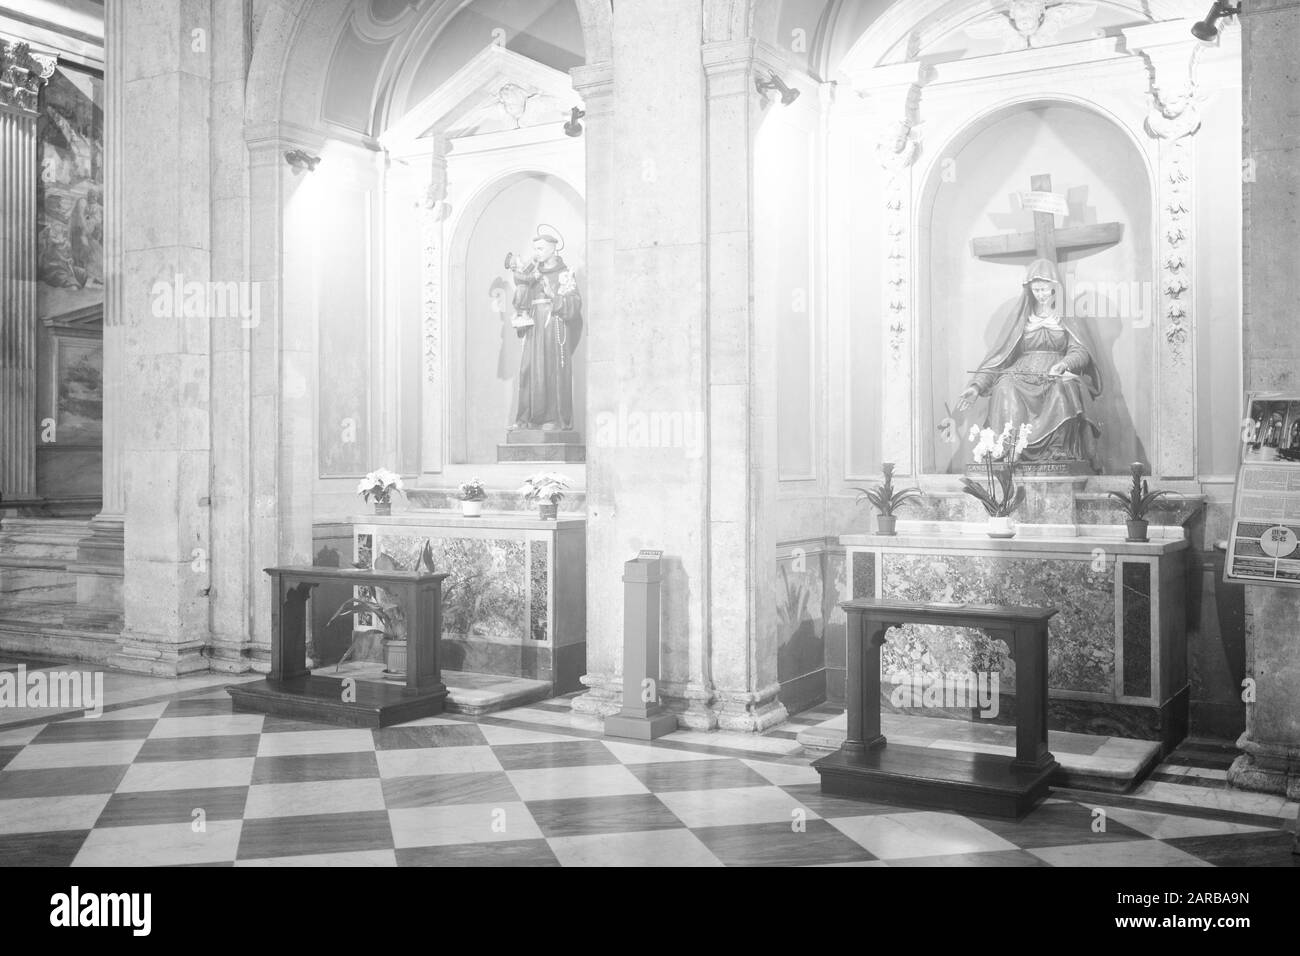 Rome, Italy - Dec 31, 2019: italy, rome, piazza navona, church of nostra signora del sacro cuore (our lady of the sacred heart) also known as san giac Stock Photo